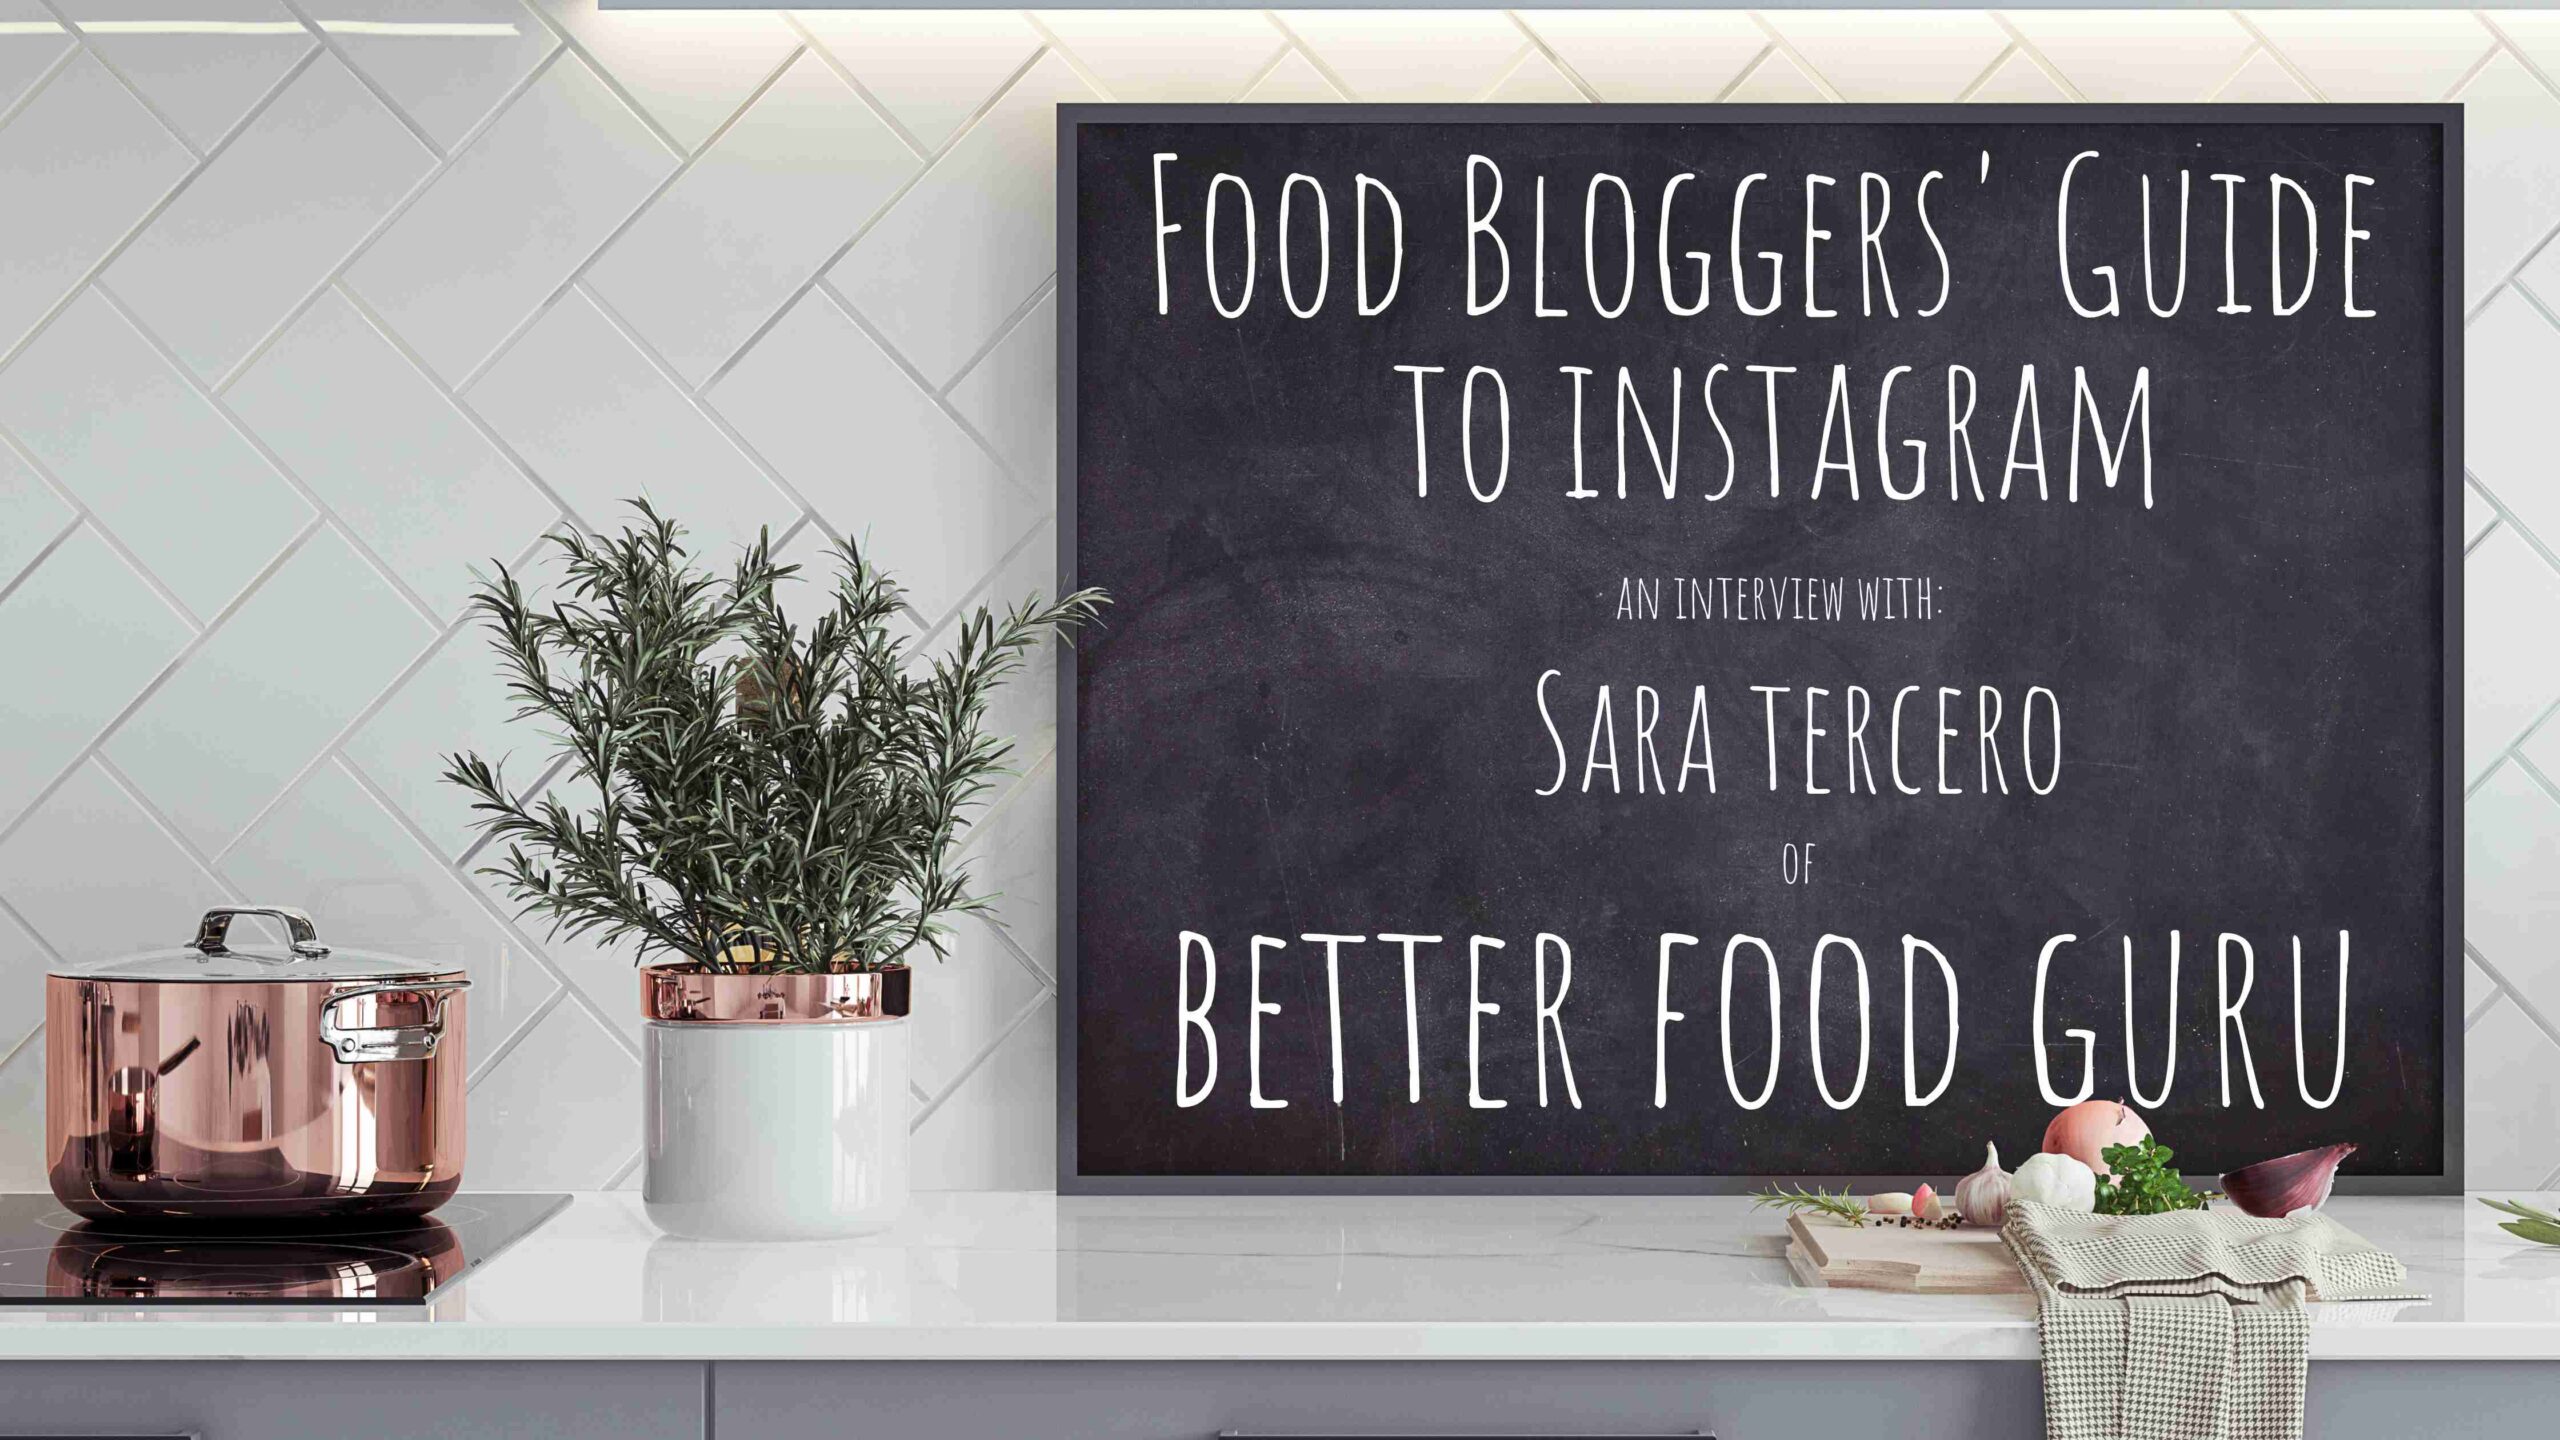 How To Be a Food Blogger on Instagram